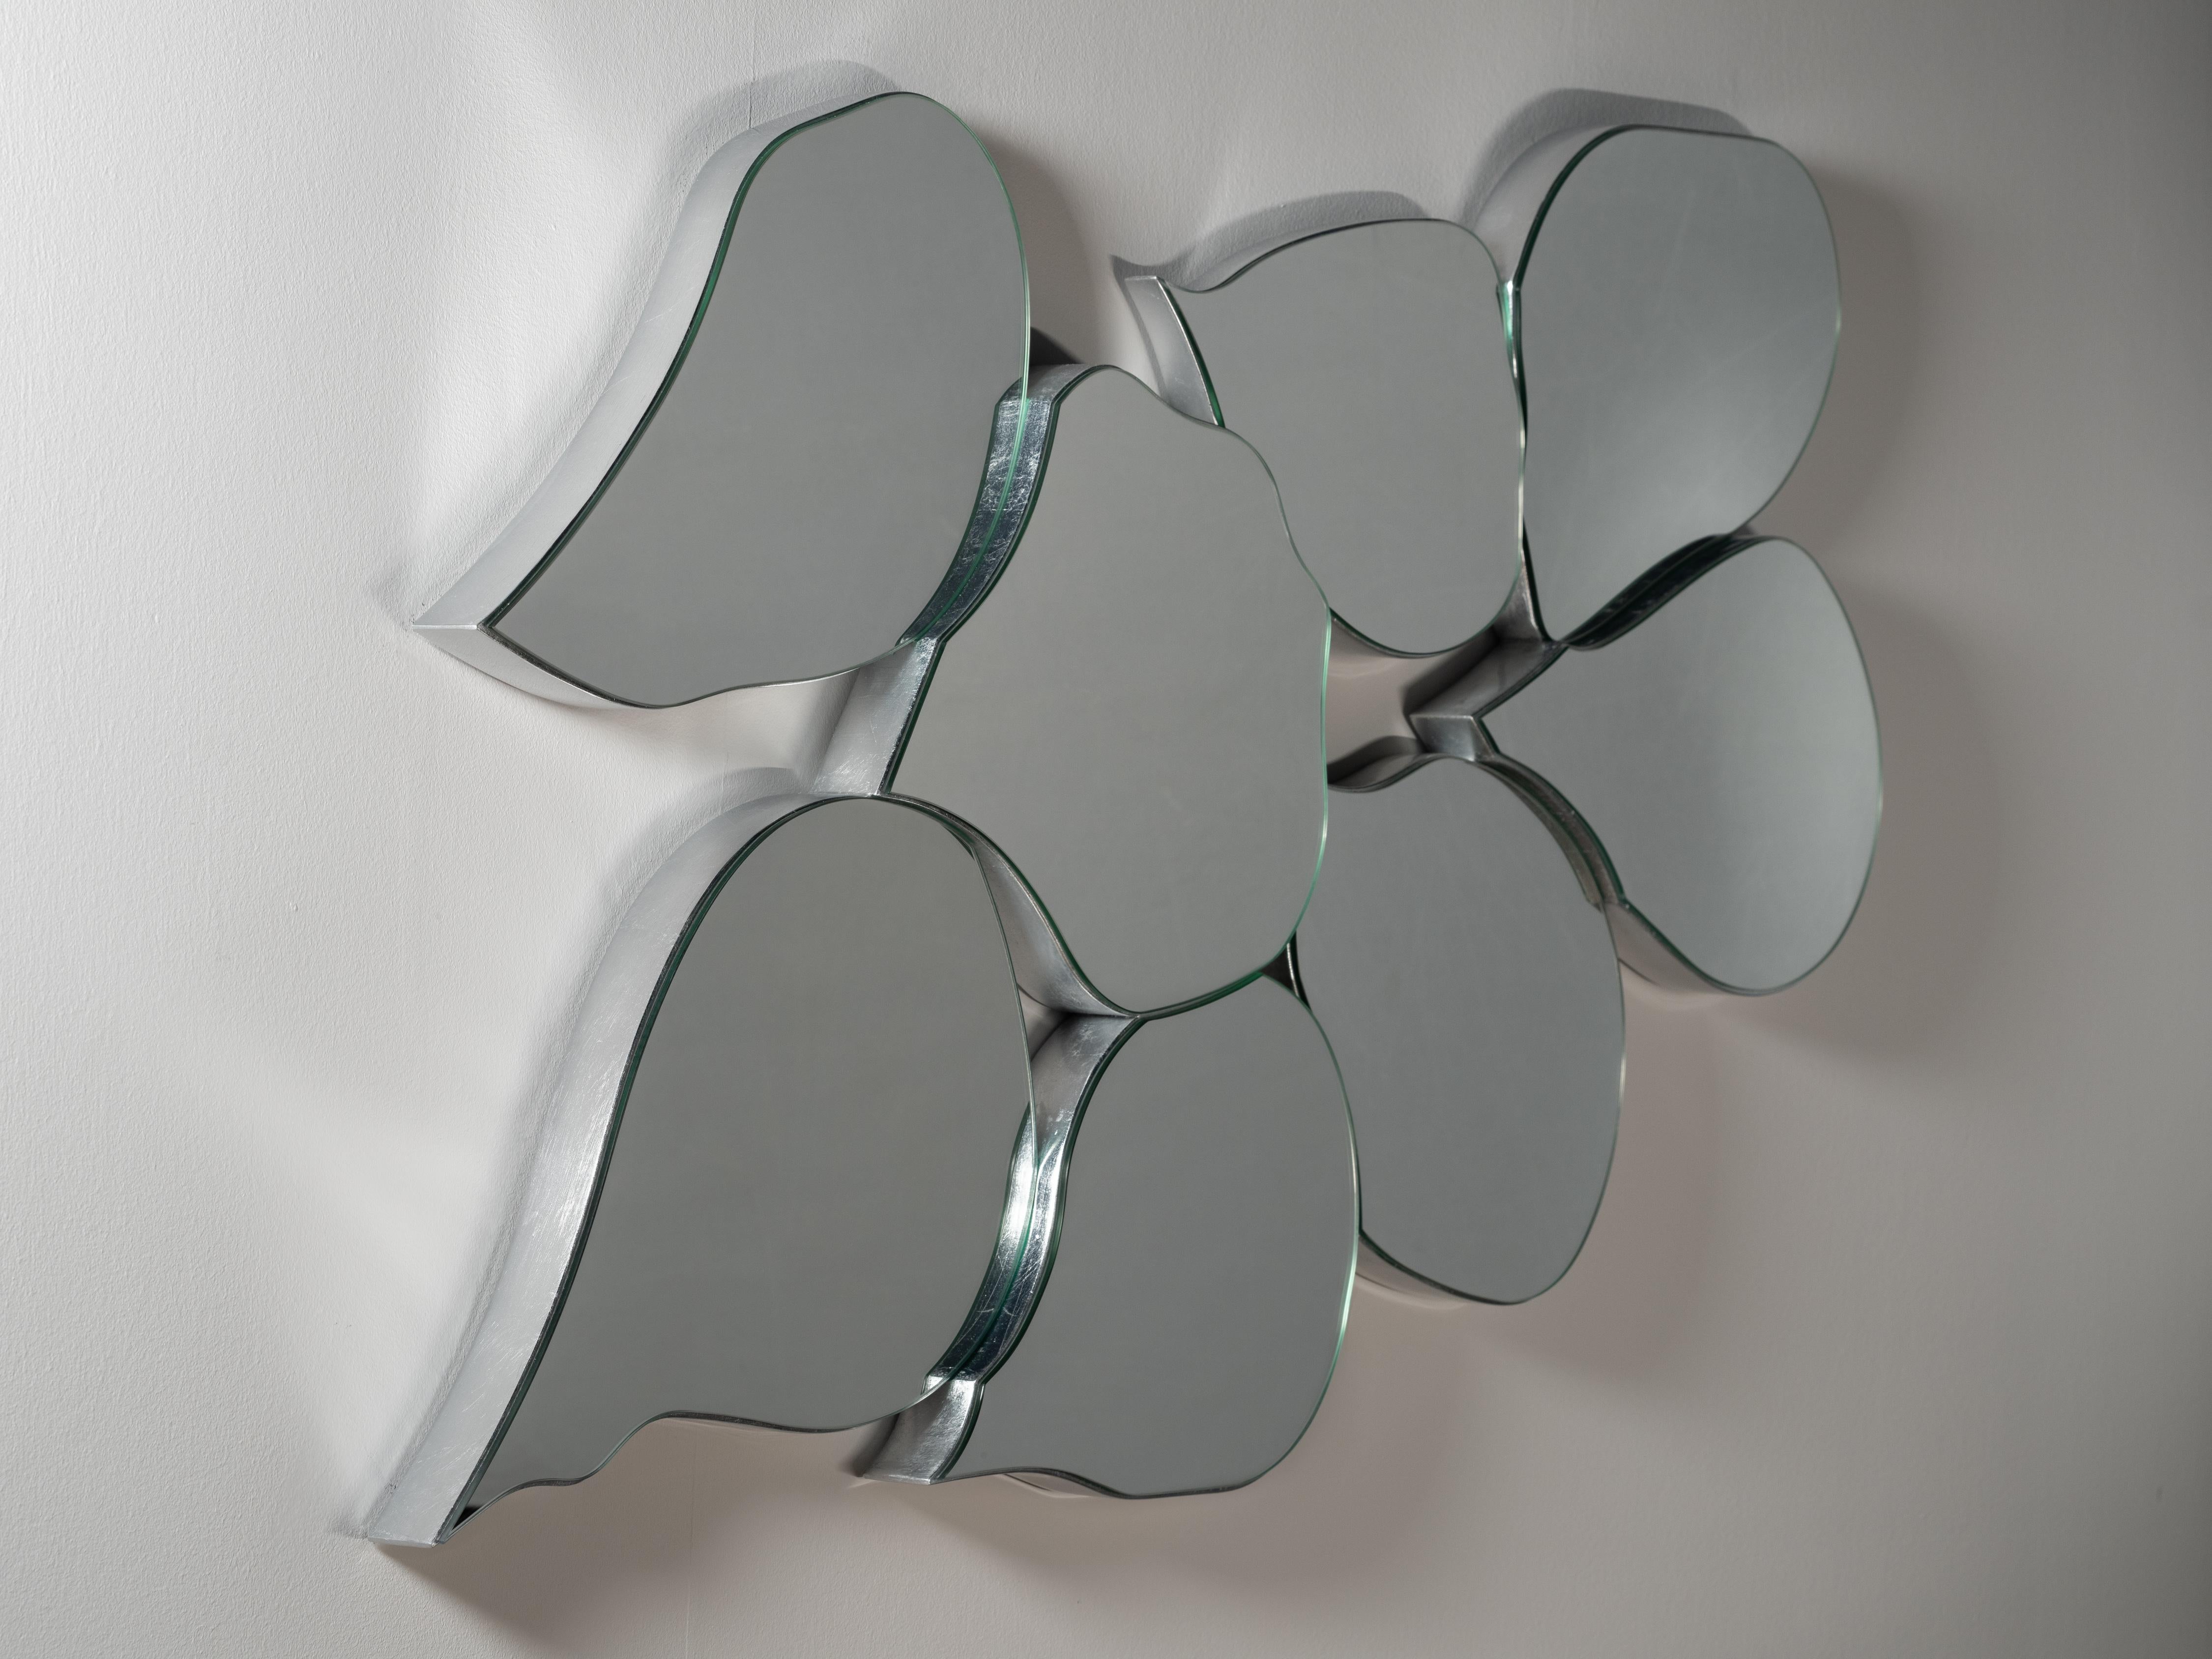 Infinity Wall Mirror, Modern Collection, Handcrafted in Portugal - Europe by GF Modern.

The Infinity wall mirror reflects the passage of time in an infinite gaze, captivating the attention with each encounter. Featuring a petal-shaped design